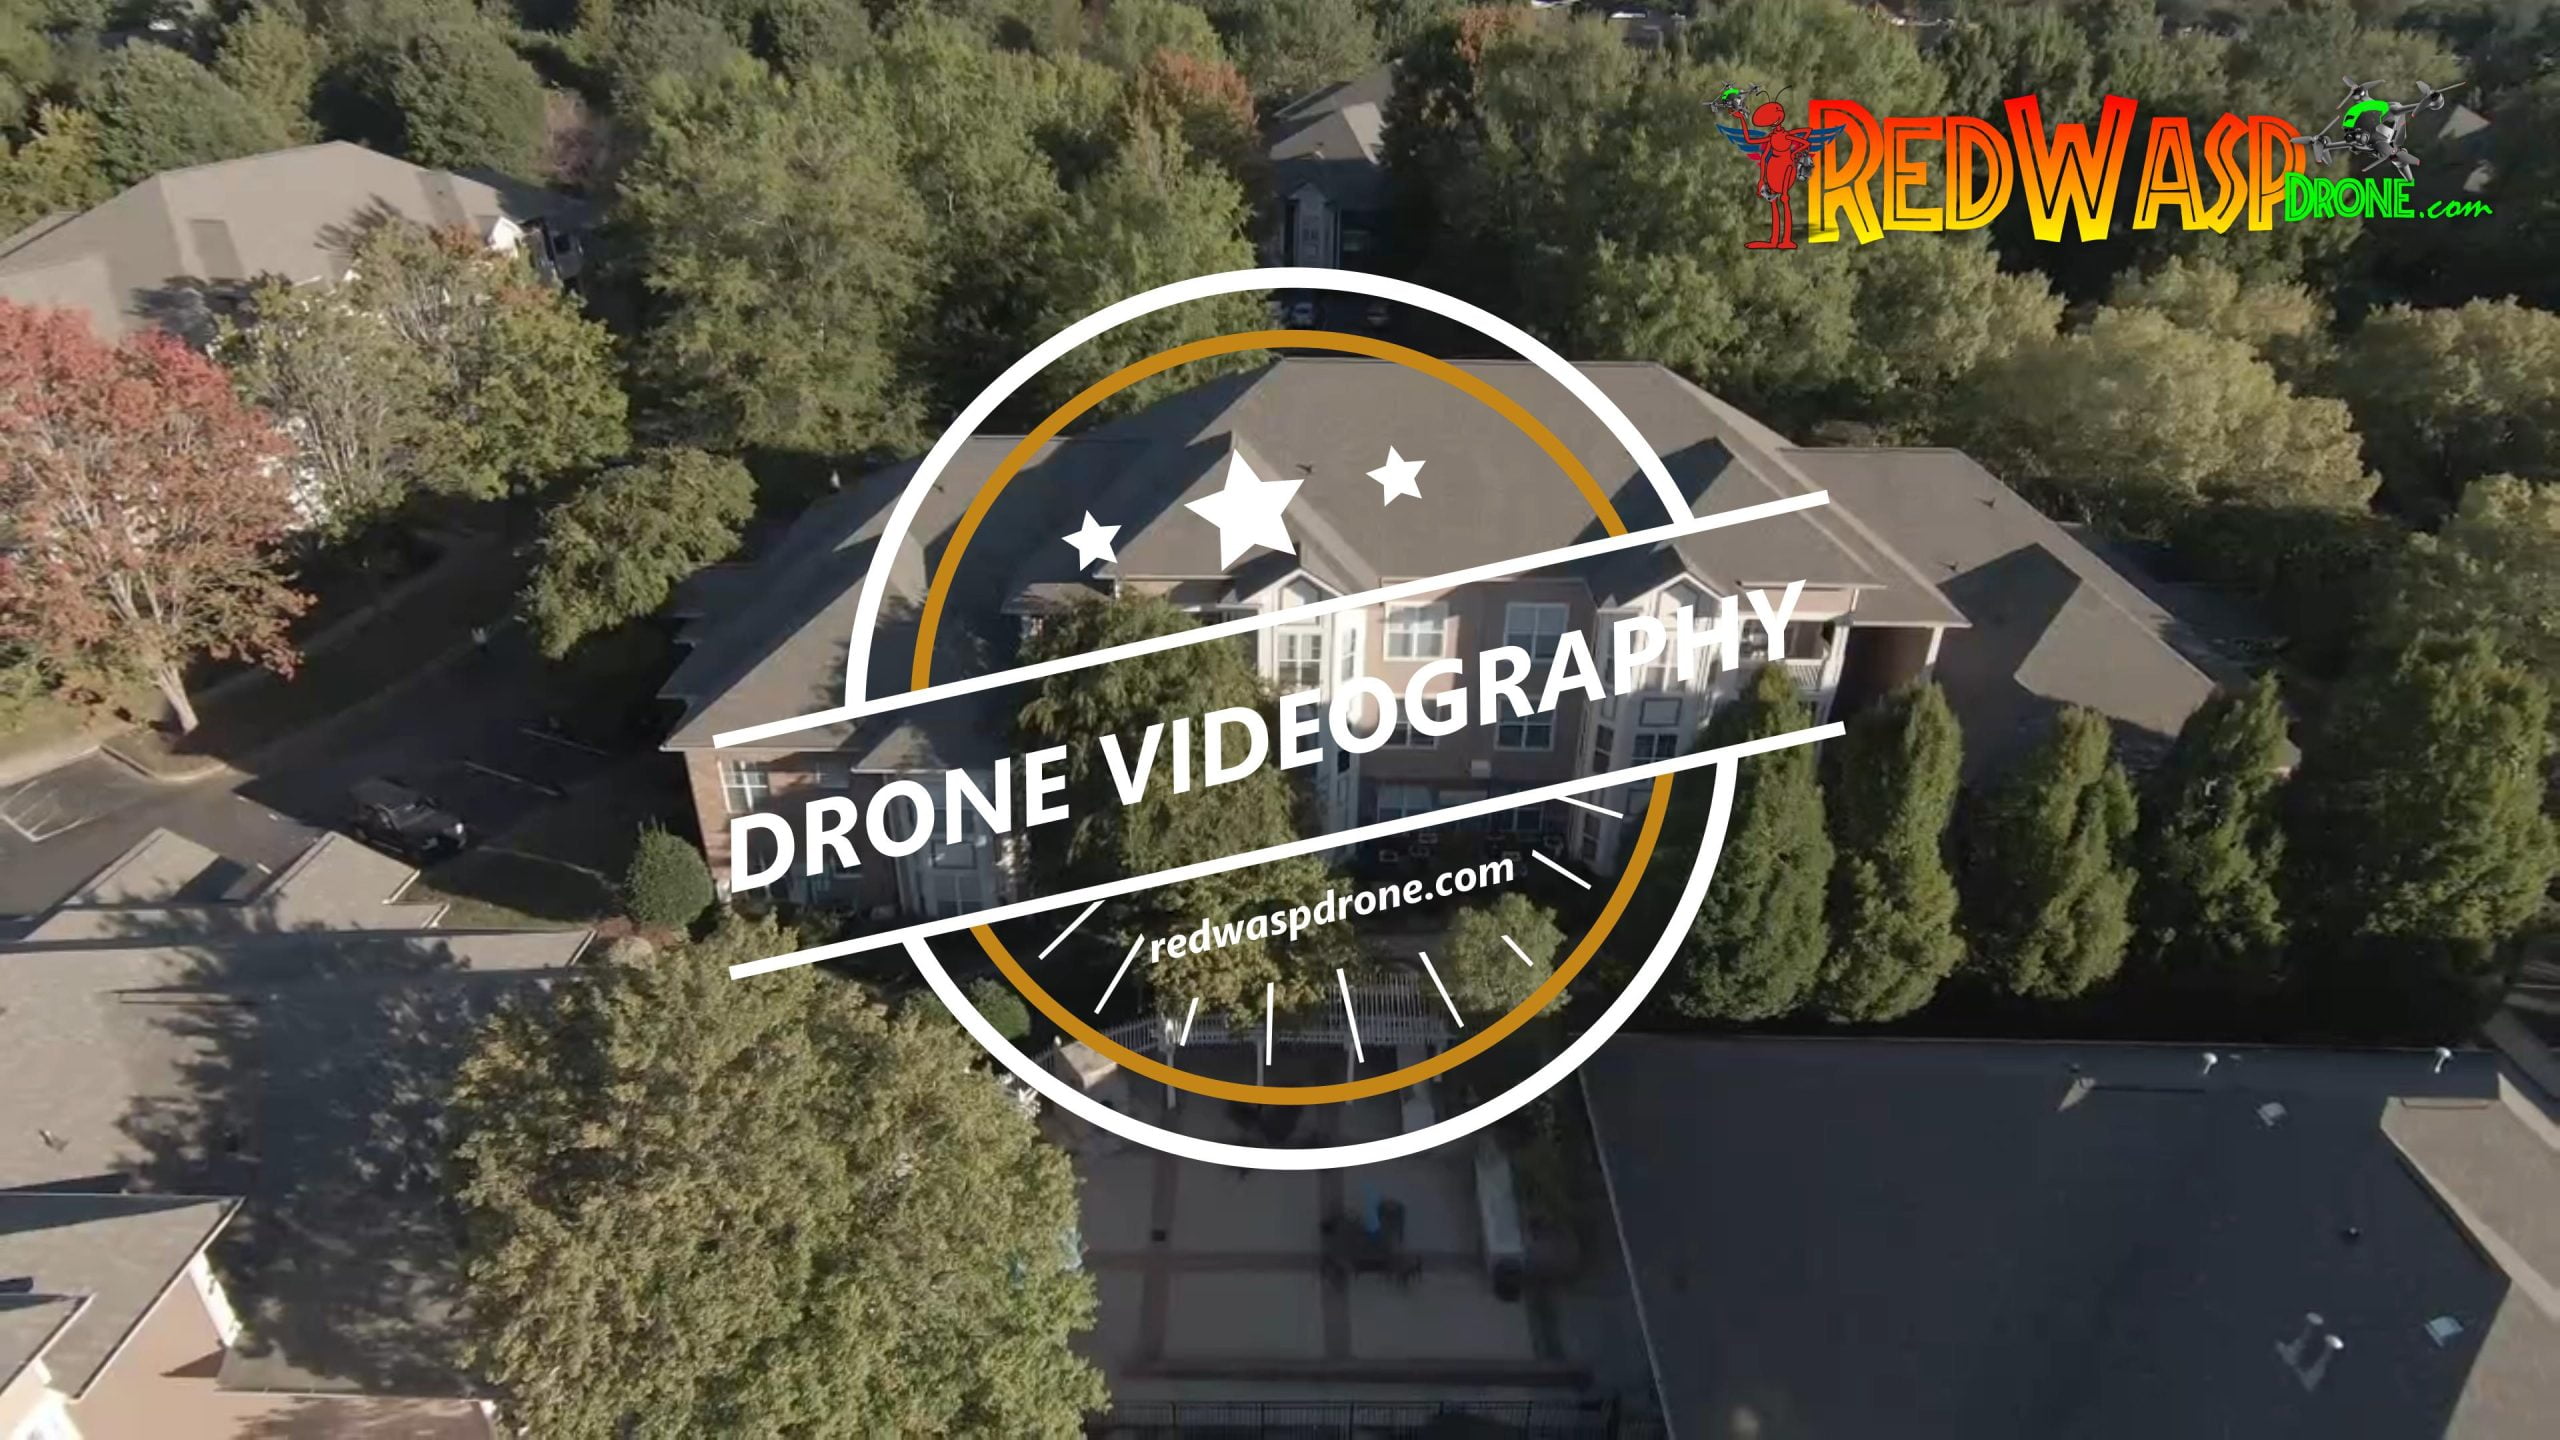 RedWasp Drone, Drone Video, Drone Mapping, Drone Photography, Drone 4k Video Services, Drone Service in Pensacola, Drone Service, Drone Service in Milton, Drone Service in Pace